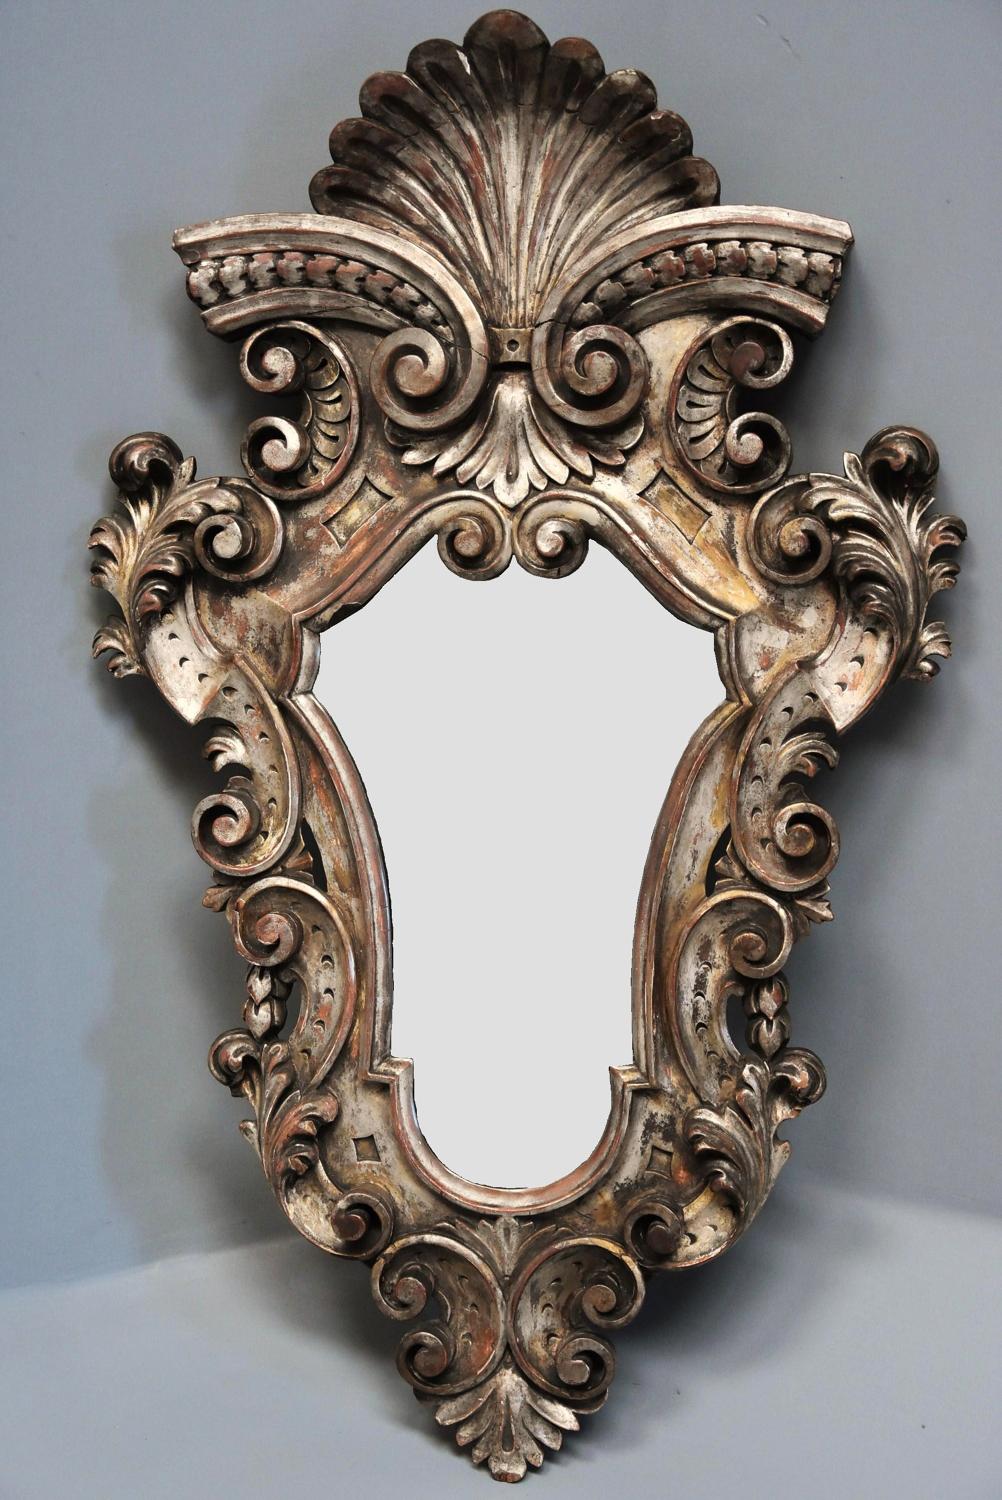 Highly decorative 19thc Italian silver giltwood Rococo style mirror